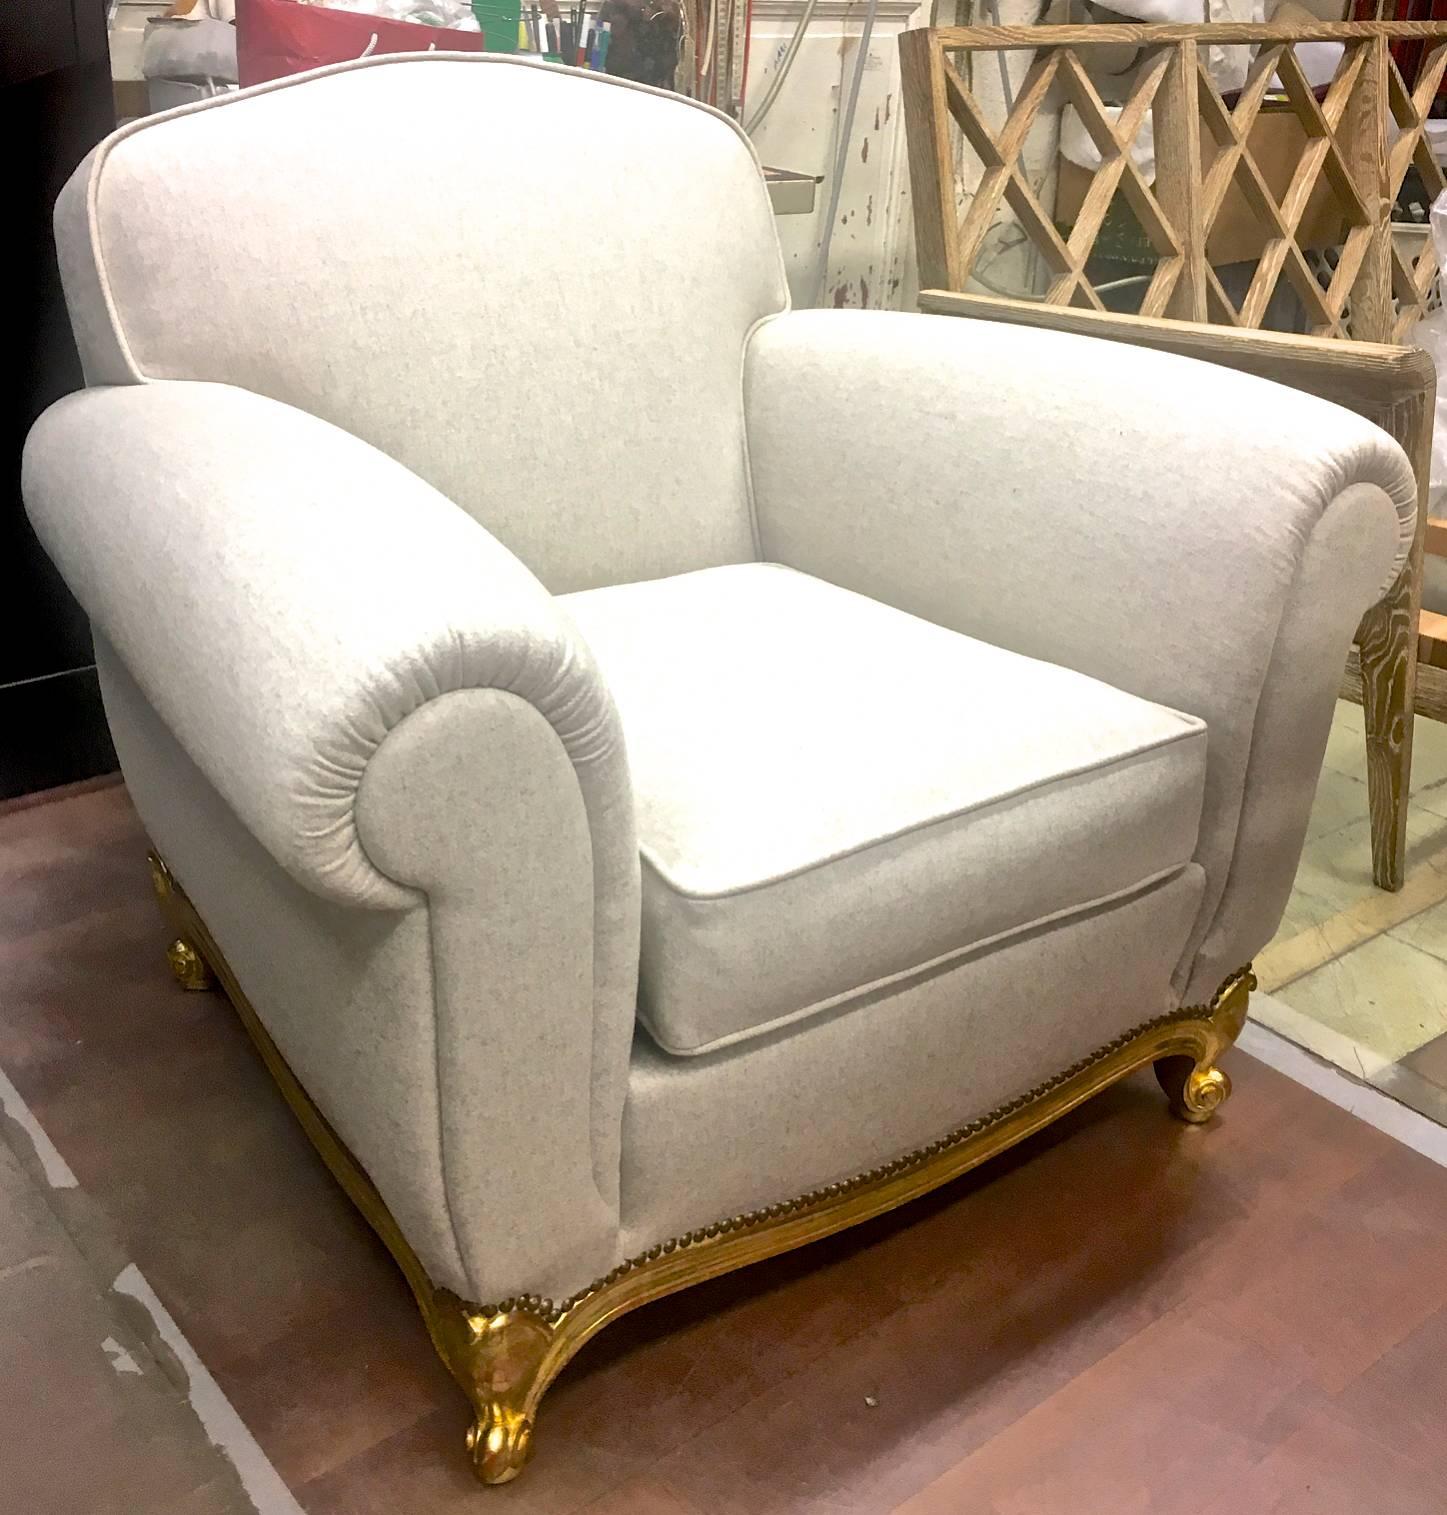 Maison Jansen exceptional comfy neoclassic big set of one couch and two armchairs with gold leaf legs and lower frame fully restored in neutral cloth
Couch measures in cm:
depth 87 cm,
width 215cm,
seat height 42 cm,
height 80 cm.
 